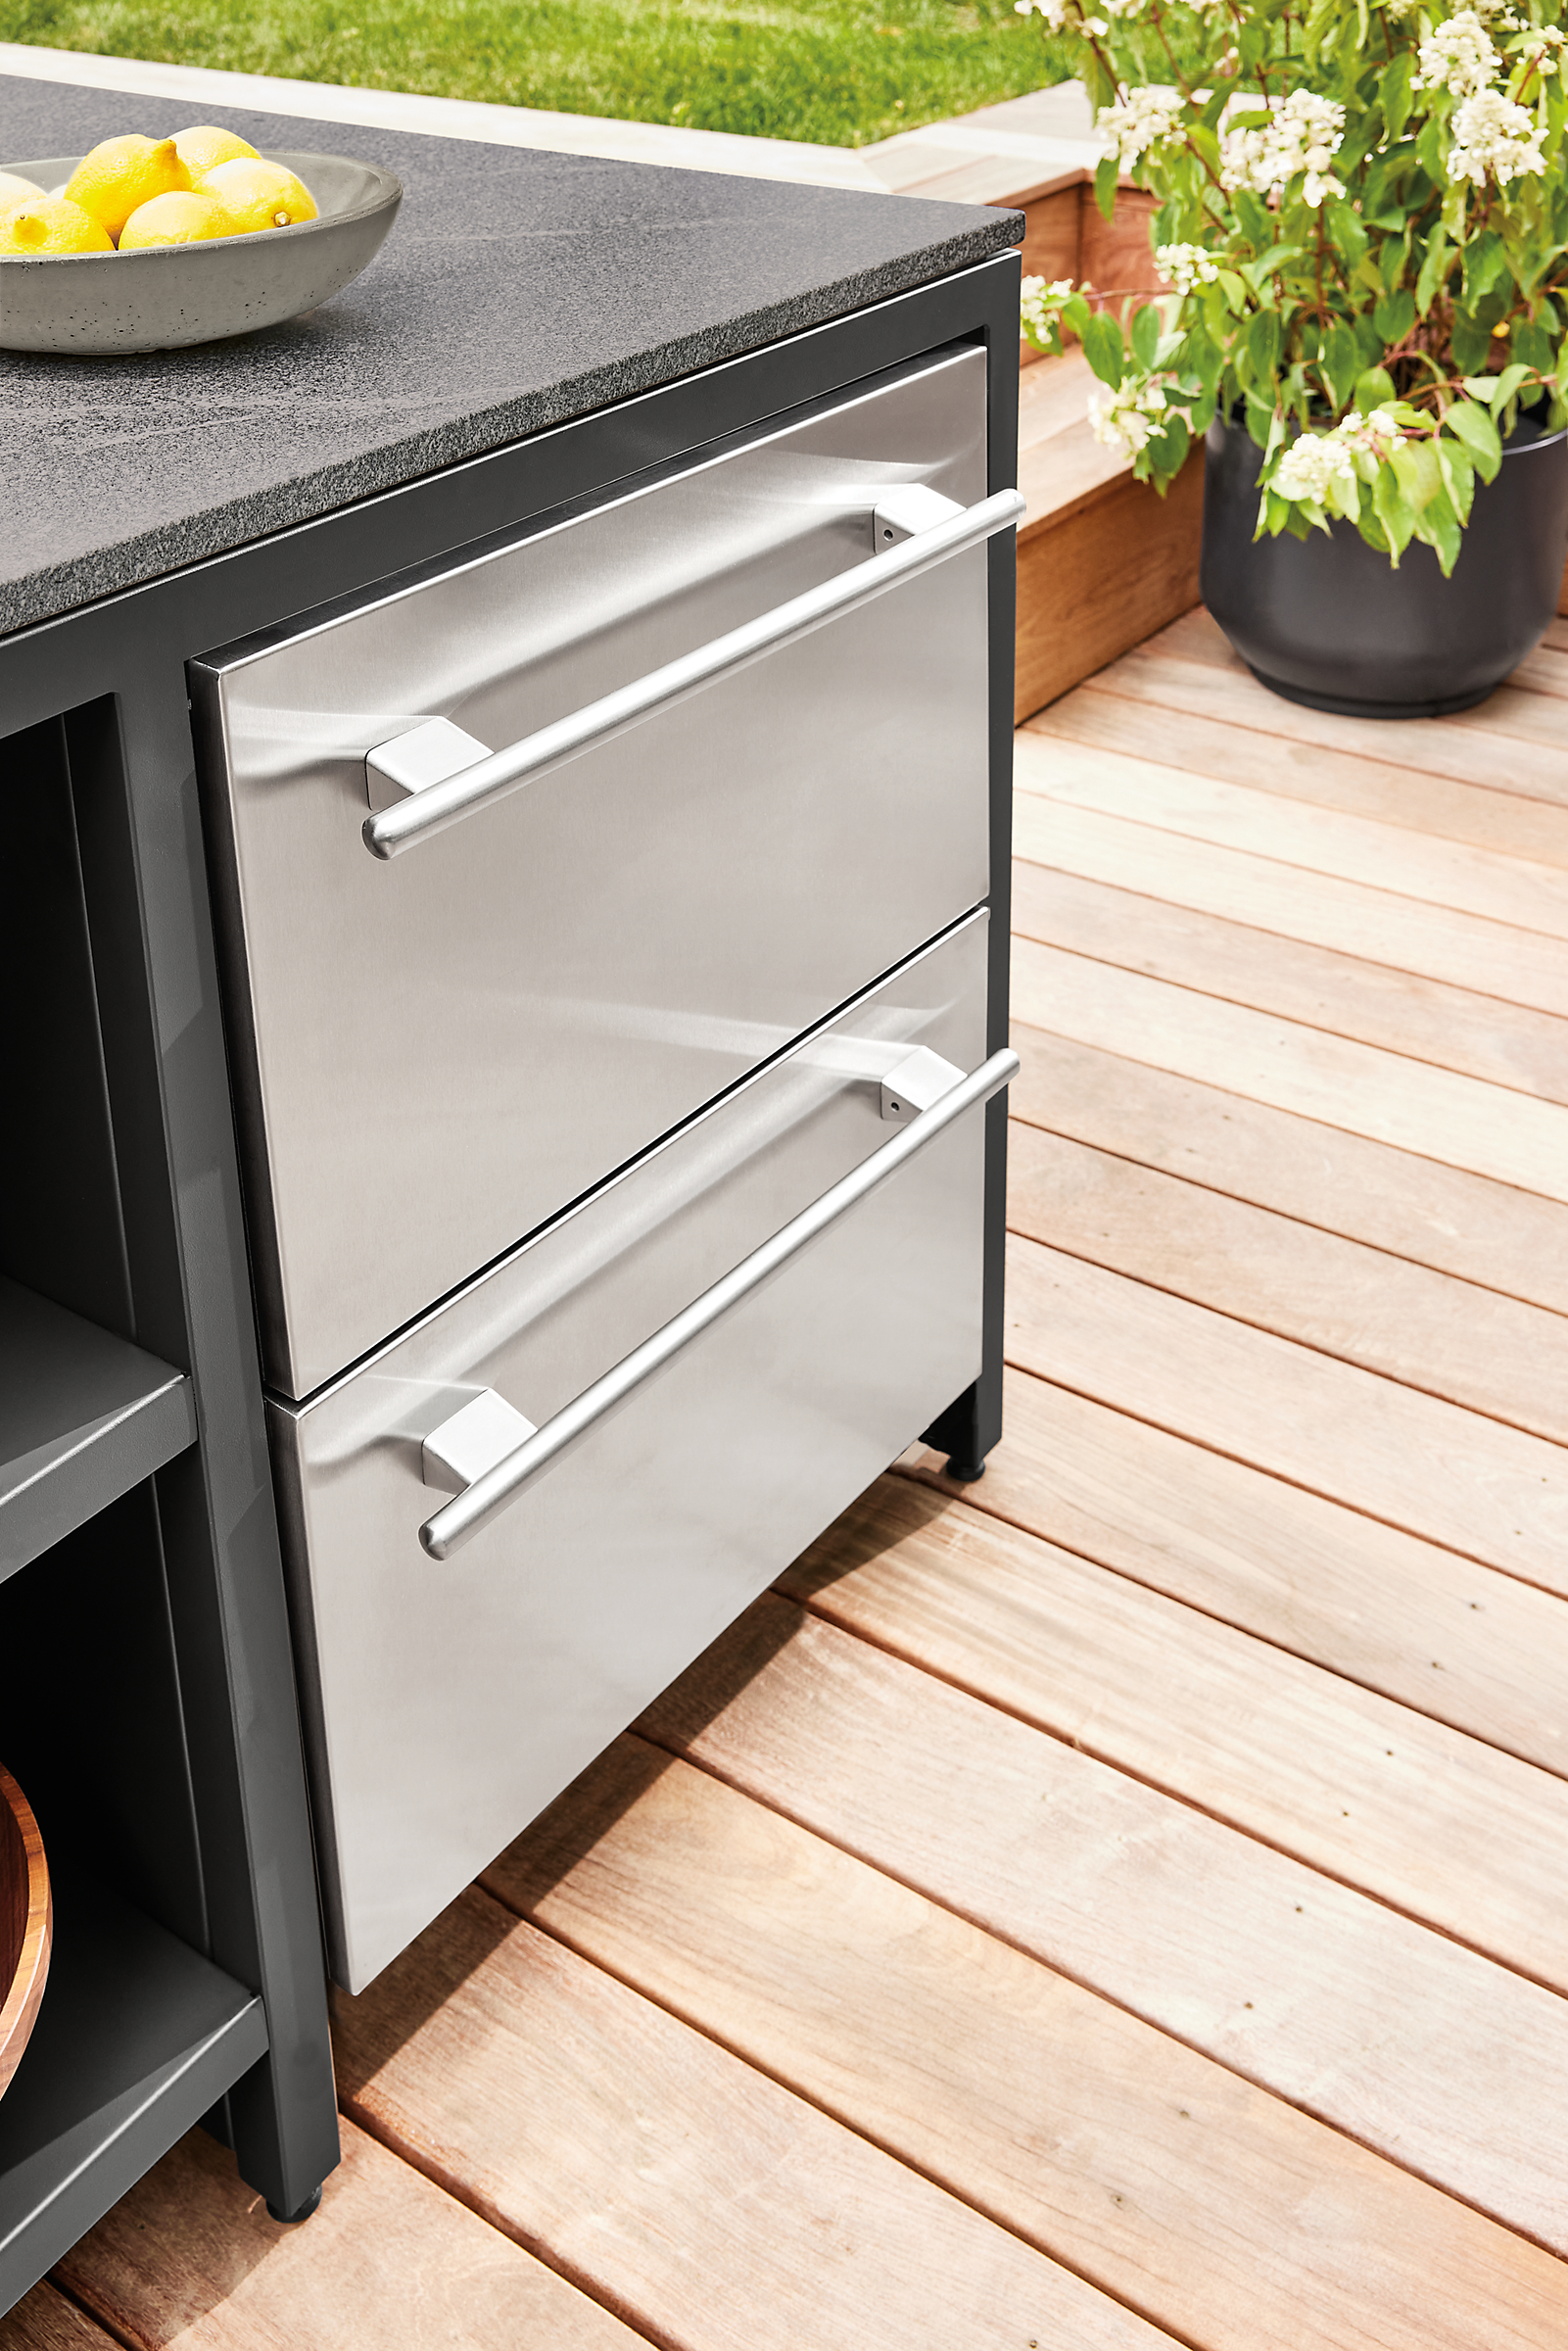 detail of outdoor fridge with drawers in parsons counter table in outdoor space.